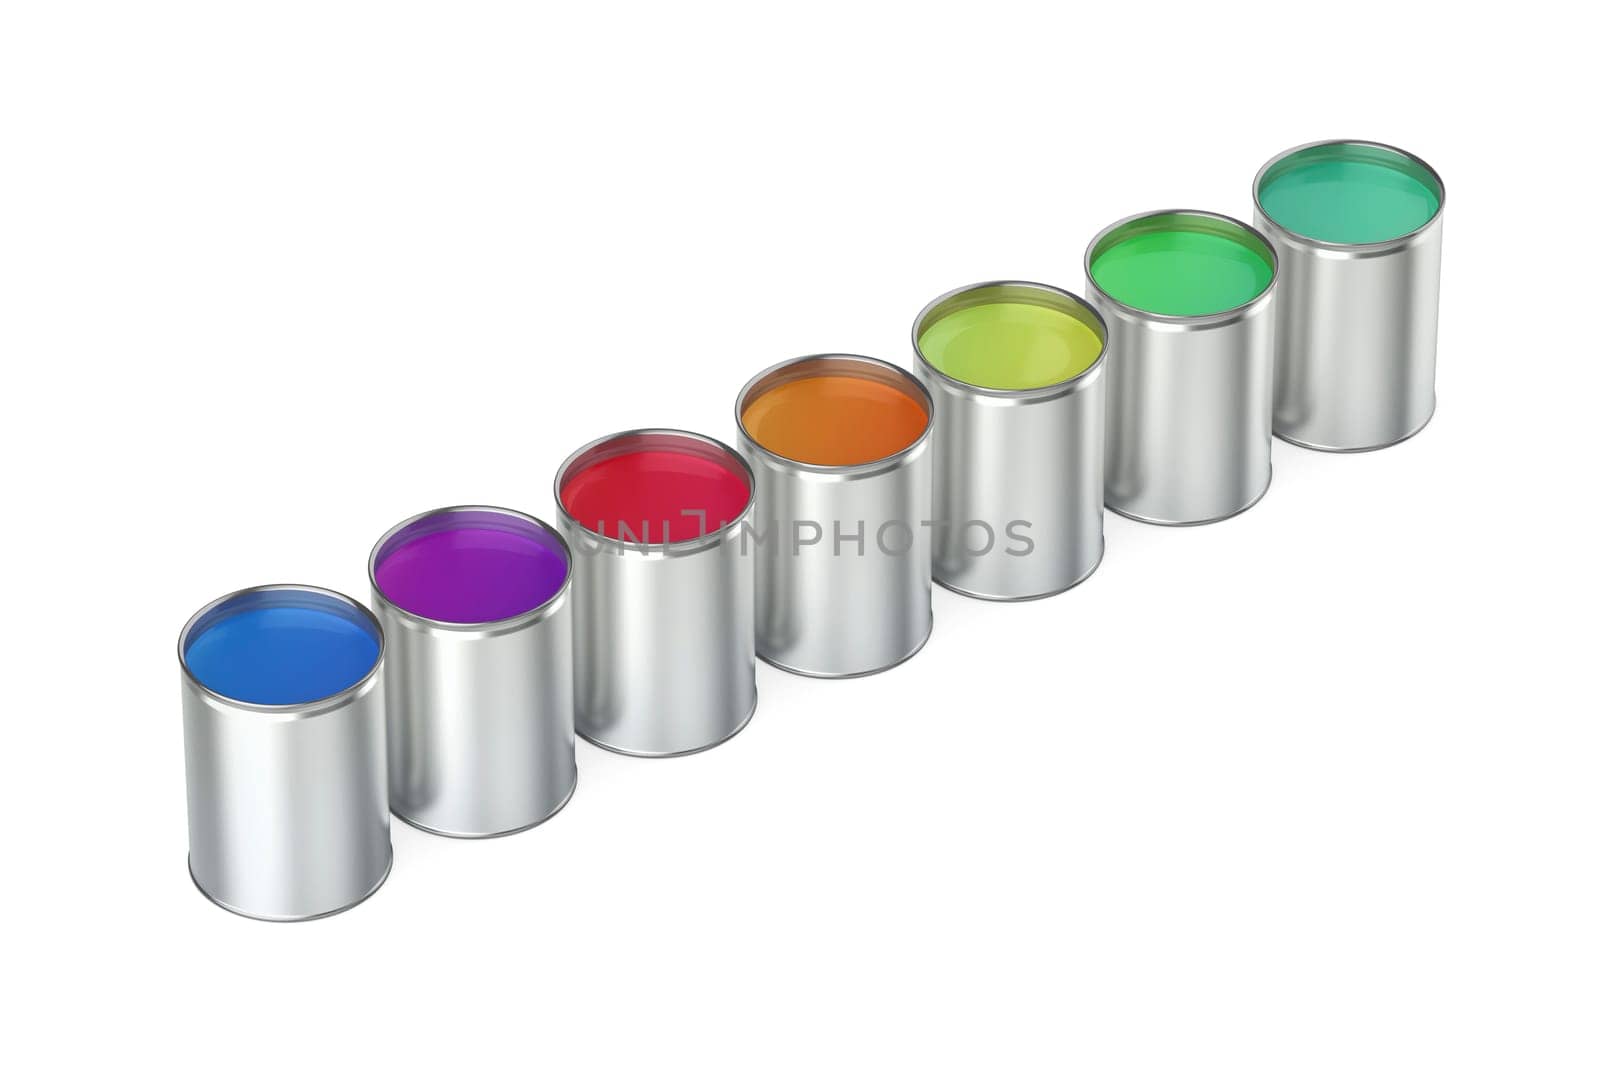 Row with seven paint cans with different colors